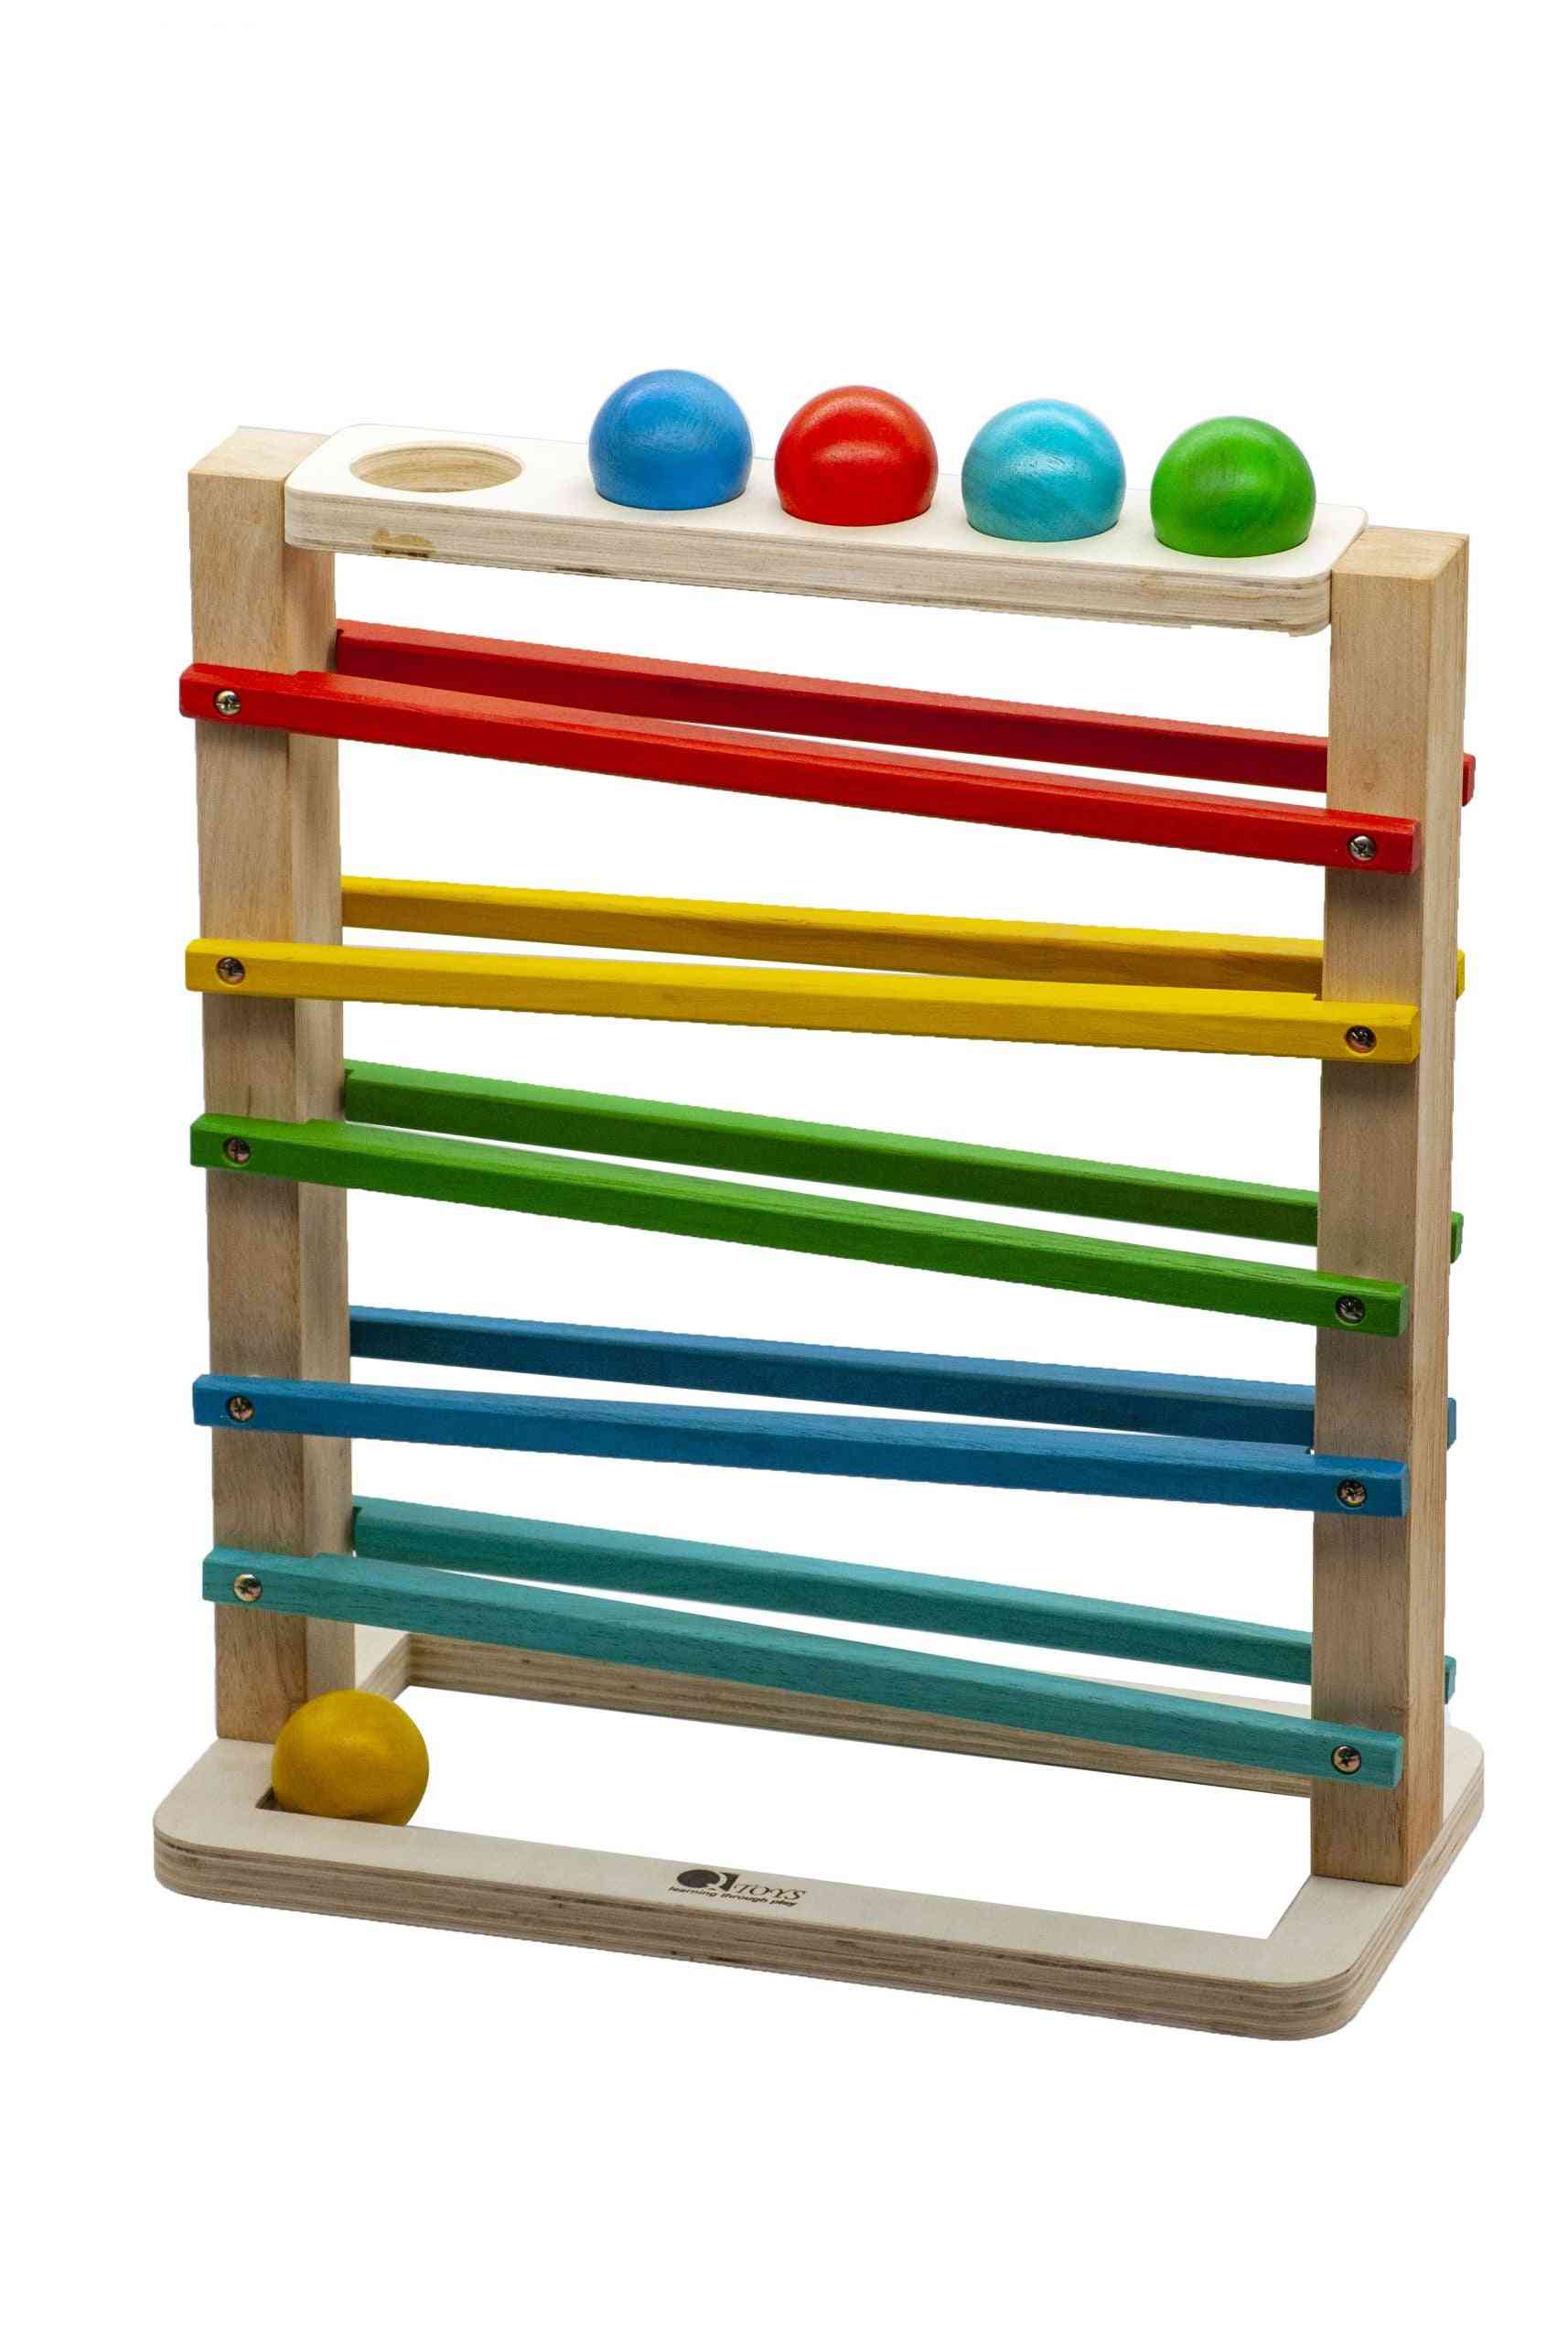 Track A Ball Rack Toy